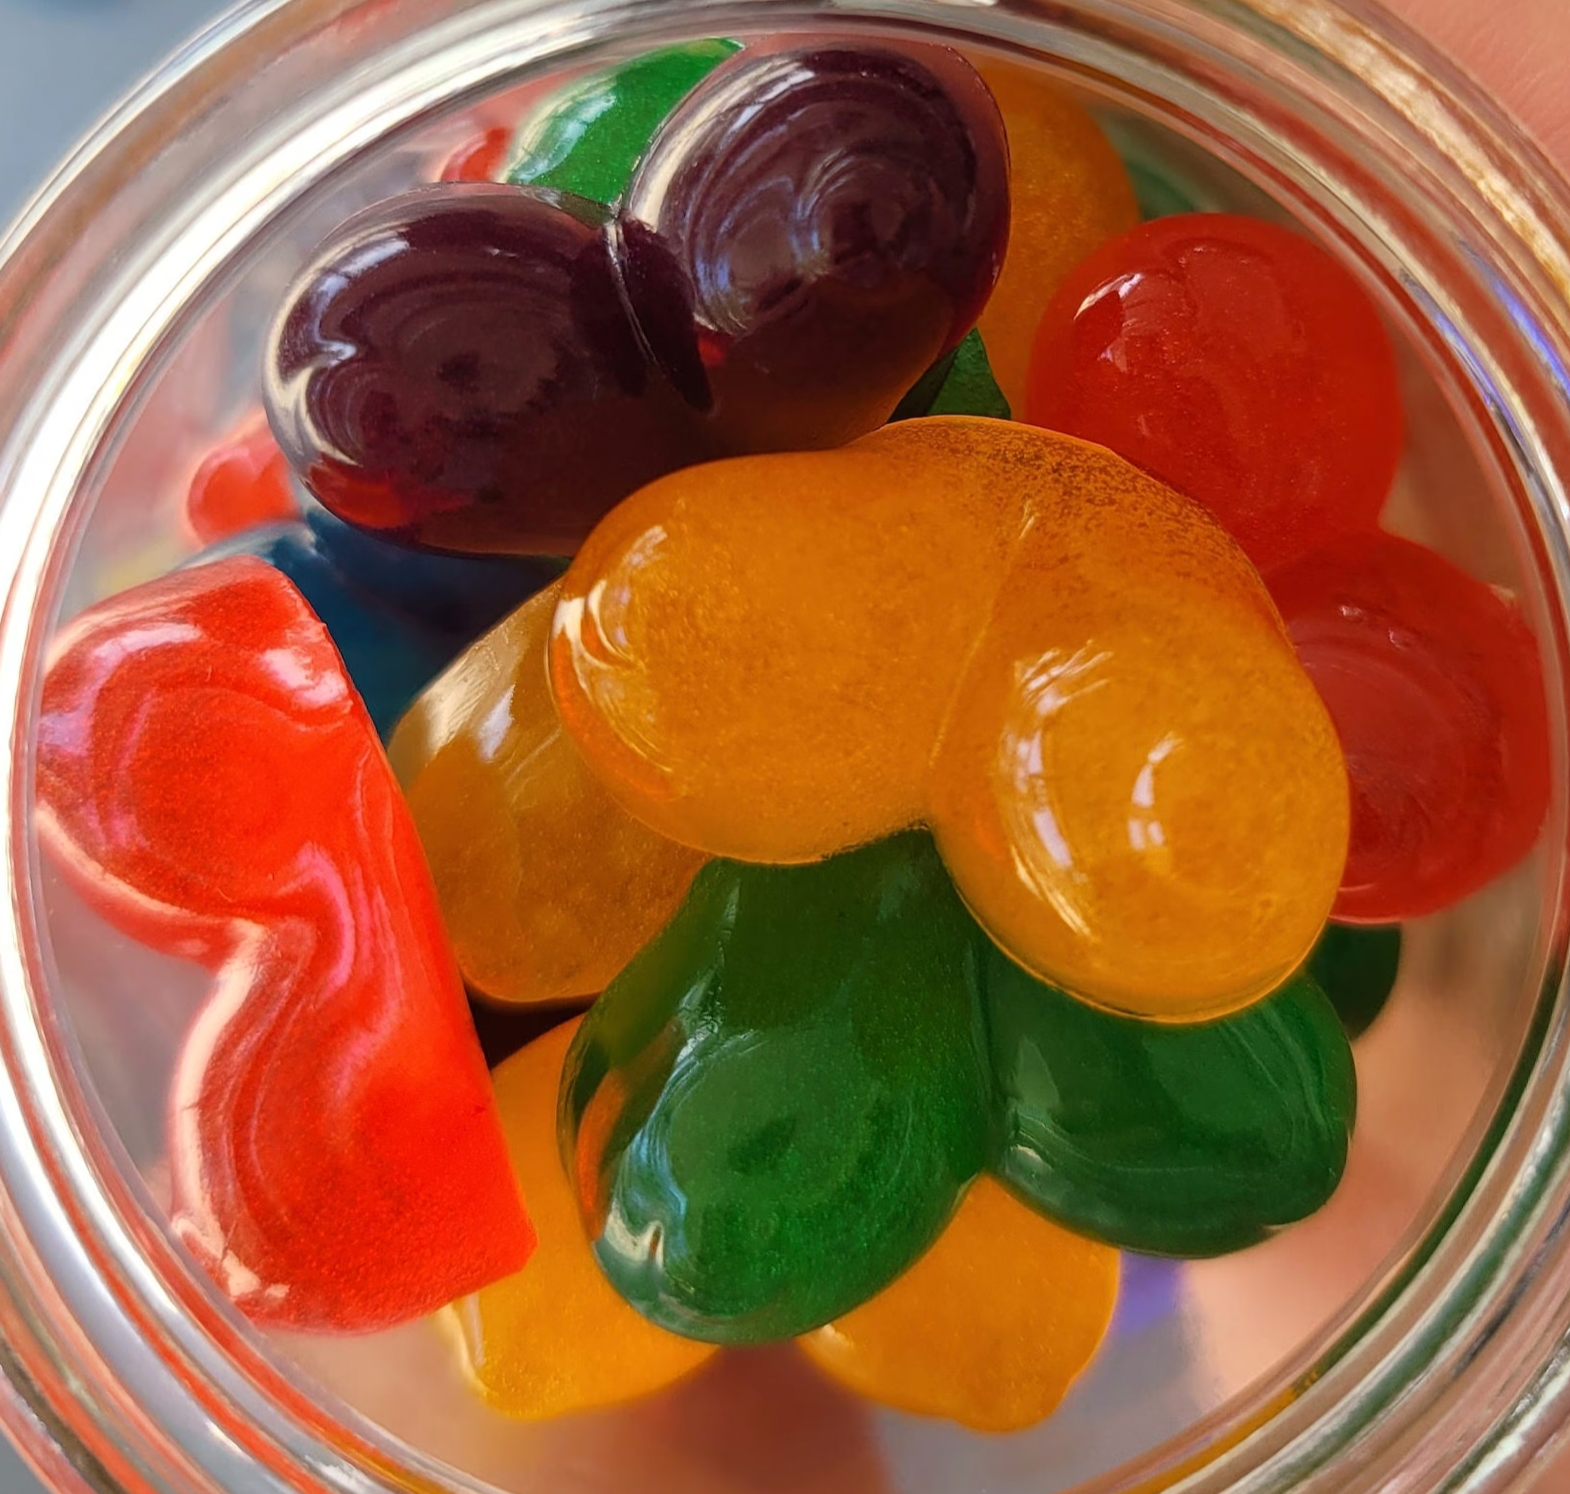  Fruity Flavored Gummy Candy Boobs - Great Bachelor Party Favor  Adult Sweet Tooth